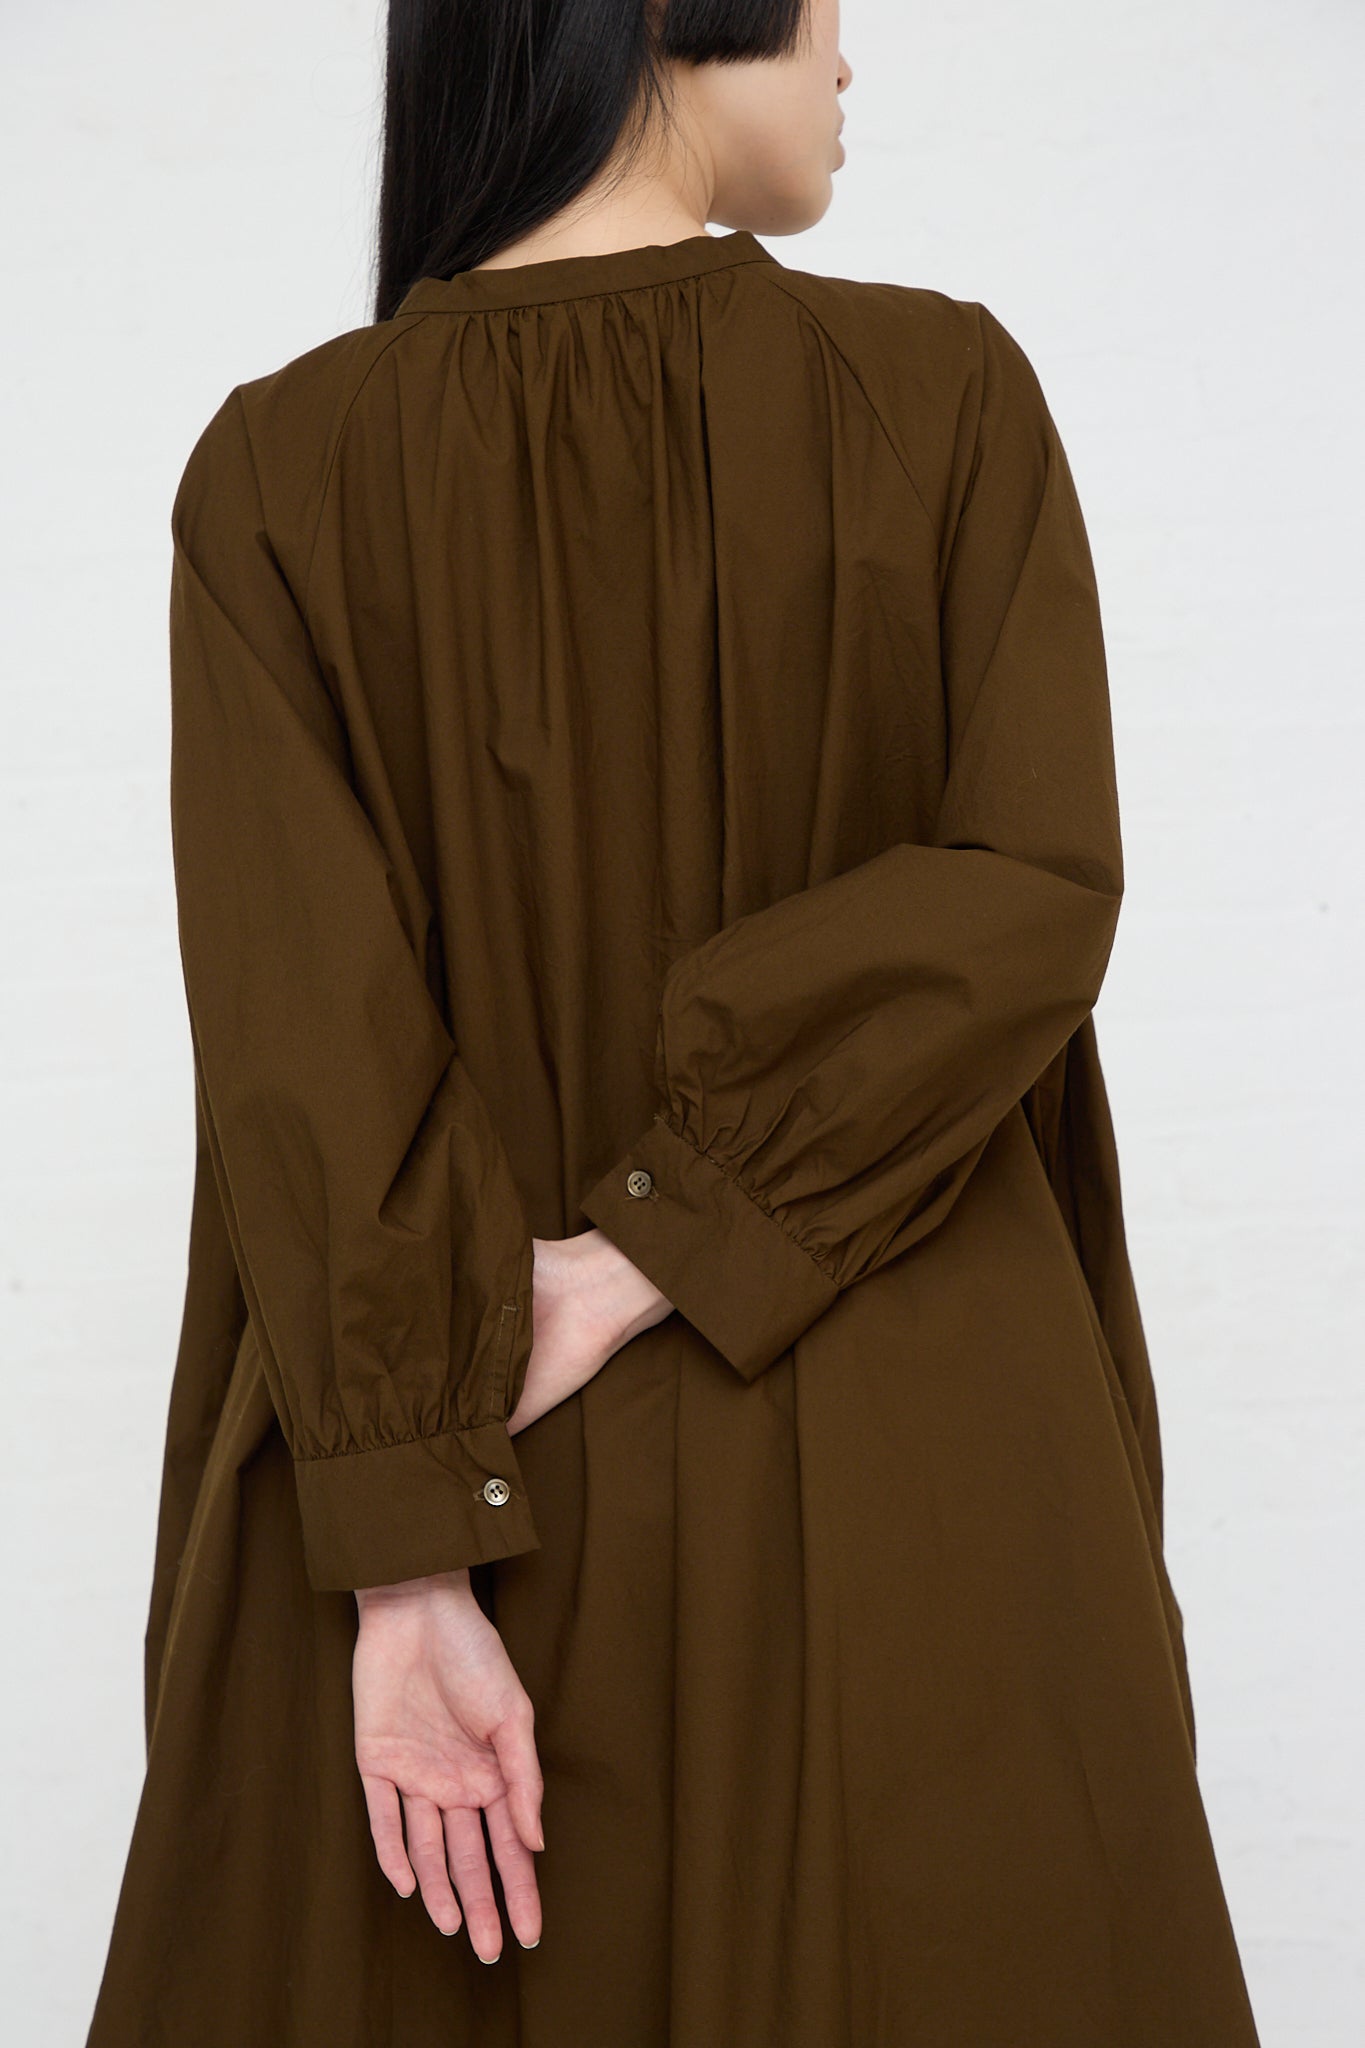 The back view of a woman wearing an Ichi Woven Cotton Shirt in Seal Brown with wide band collar.